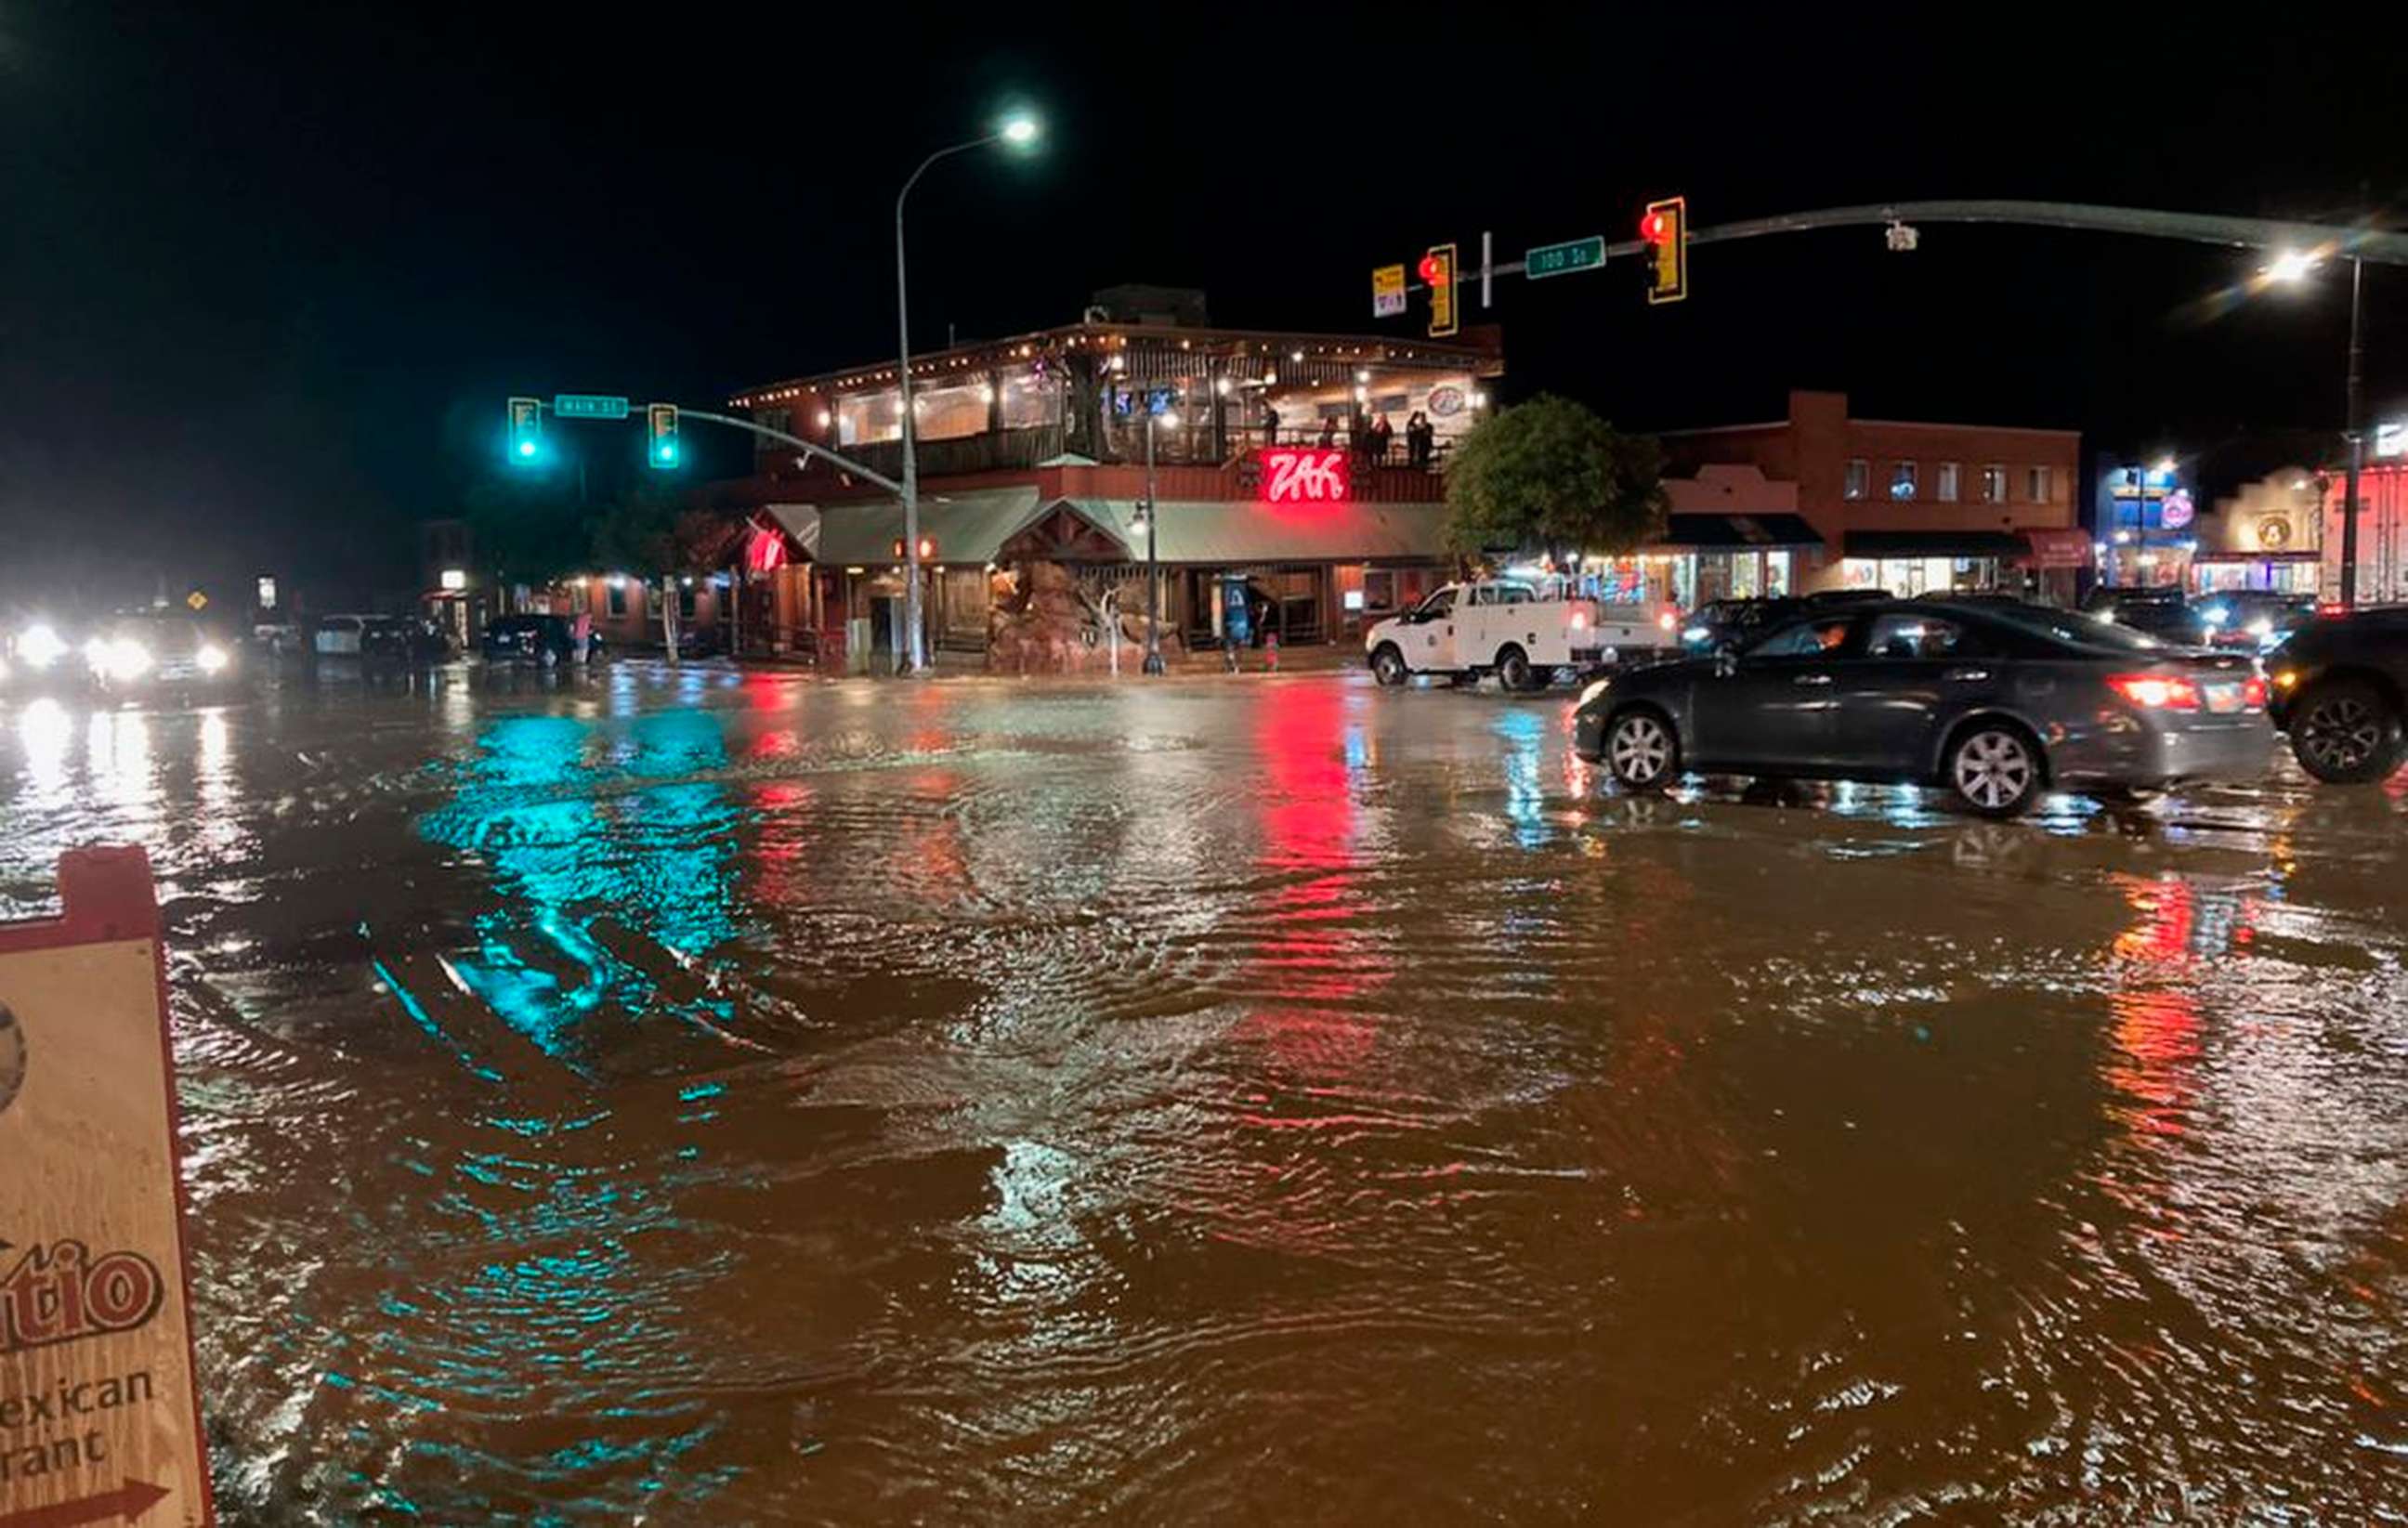 PHOTO: Vehicles navigate high waters at the intersection of South Main Street and 100 South in Moab, Utah on Aug. 20, 2022, in an image released by the City of Moab. Nearly an inch of rain fell in the area in 20 minutes, causing flooding   in places.